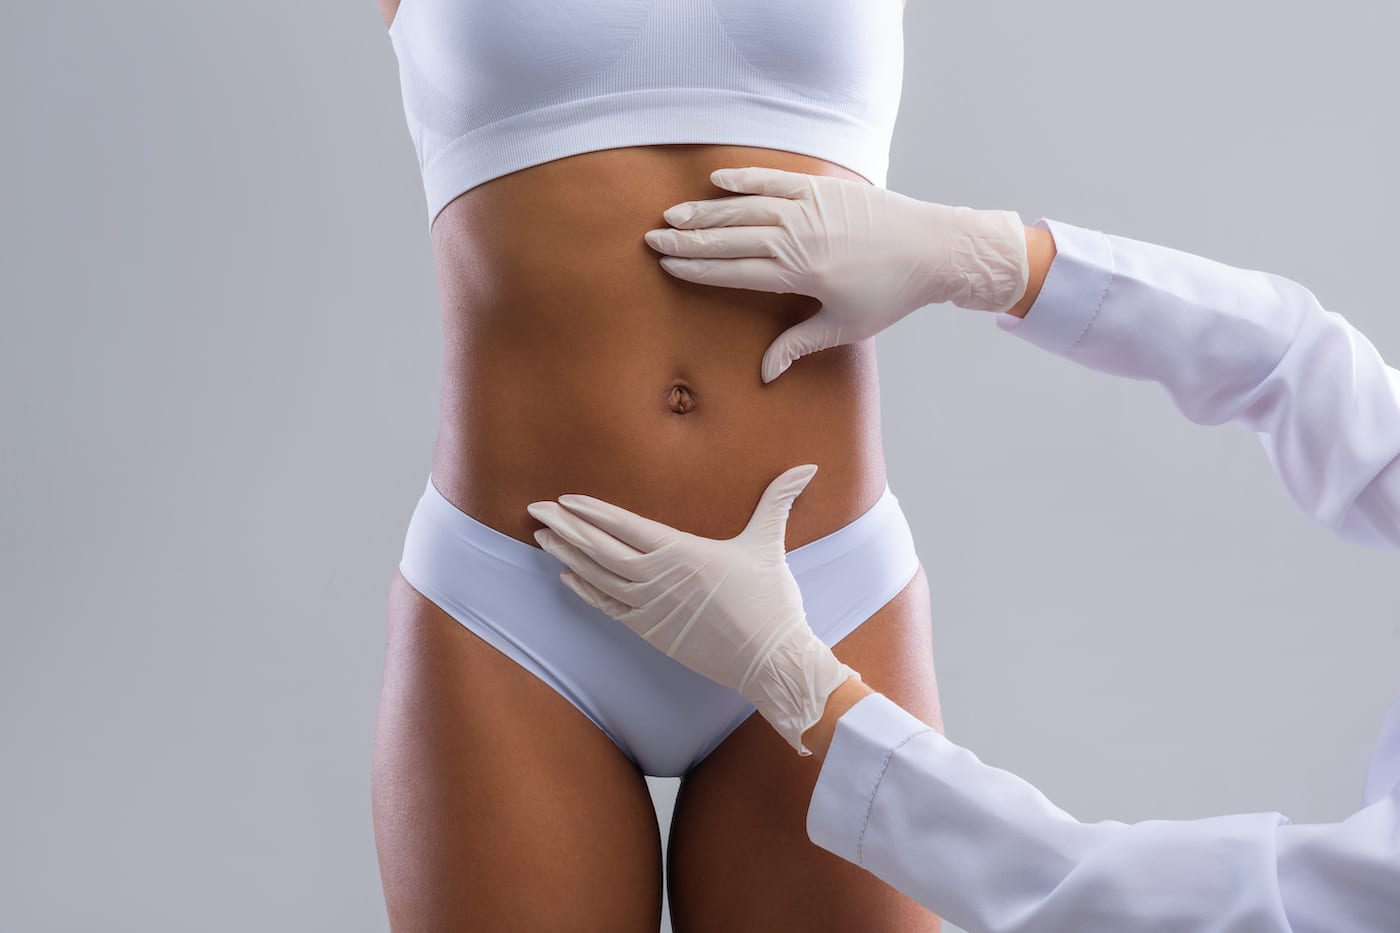 doctor pressing on woman's stomach after liposuction